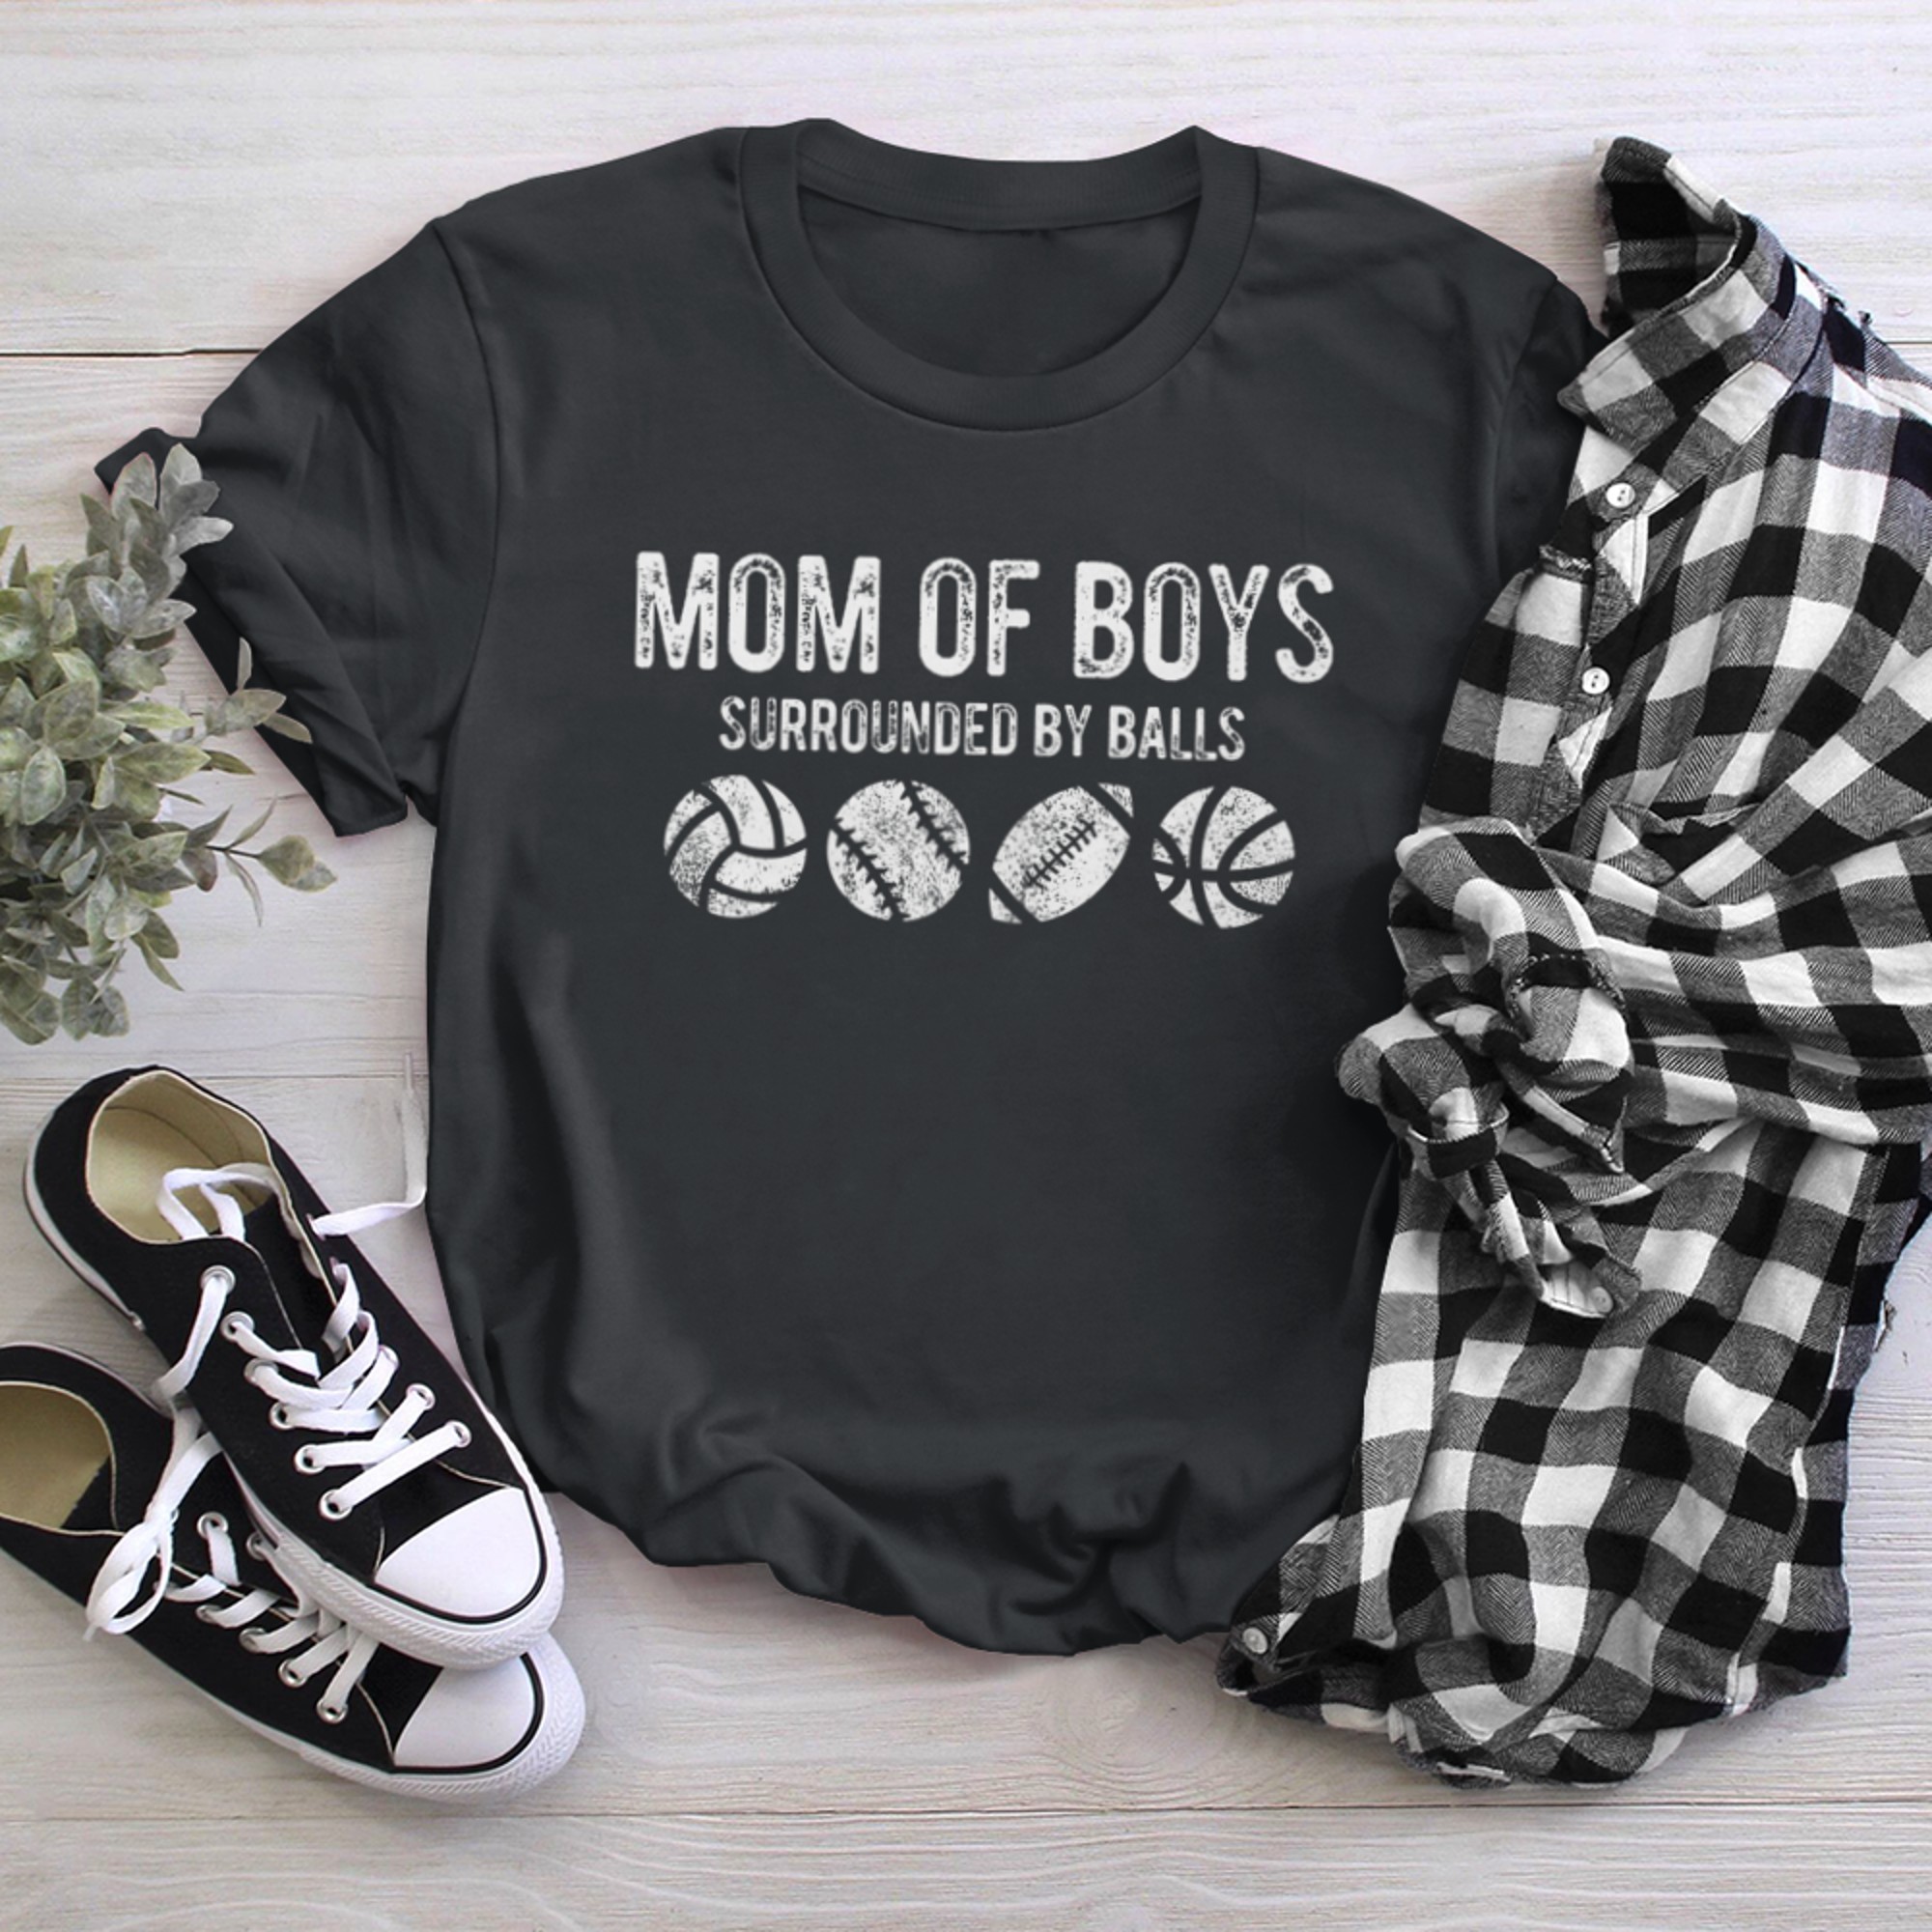 Mom Of Surrounded By Balls (3) t-shirt black